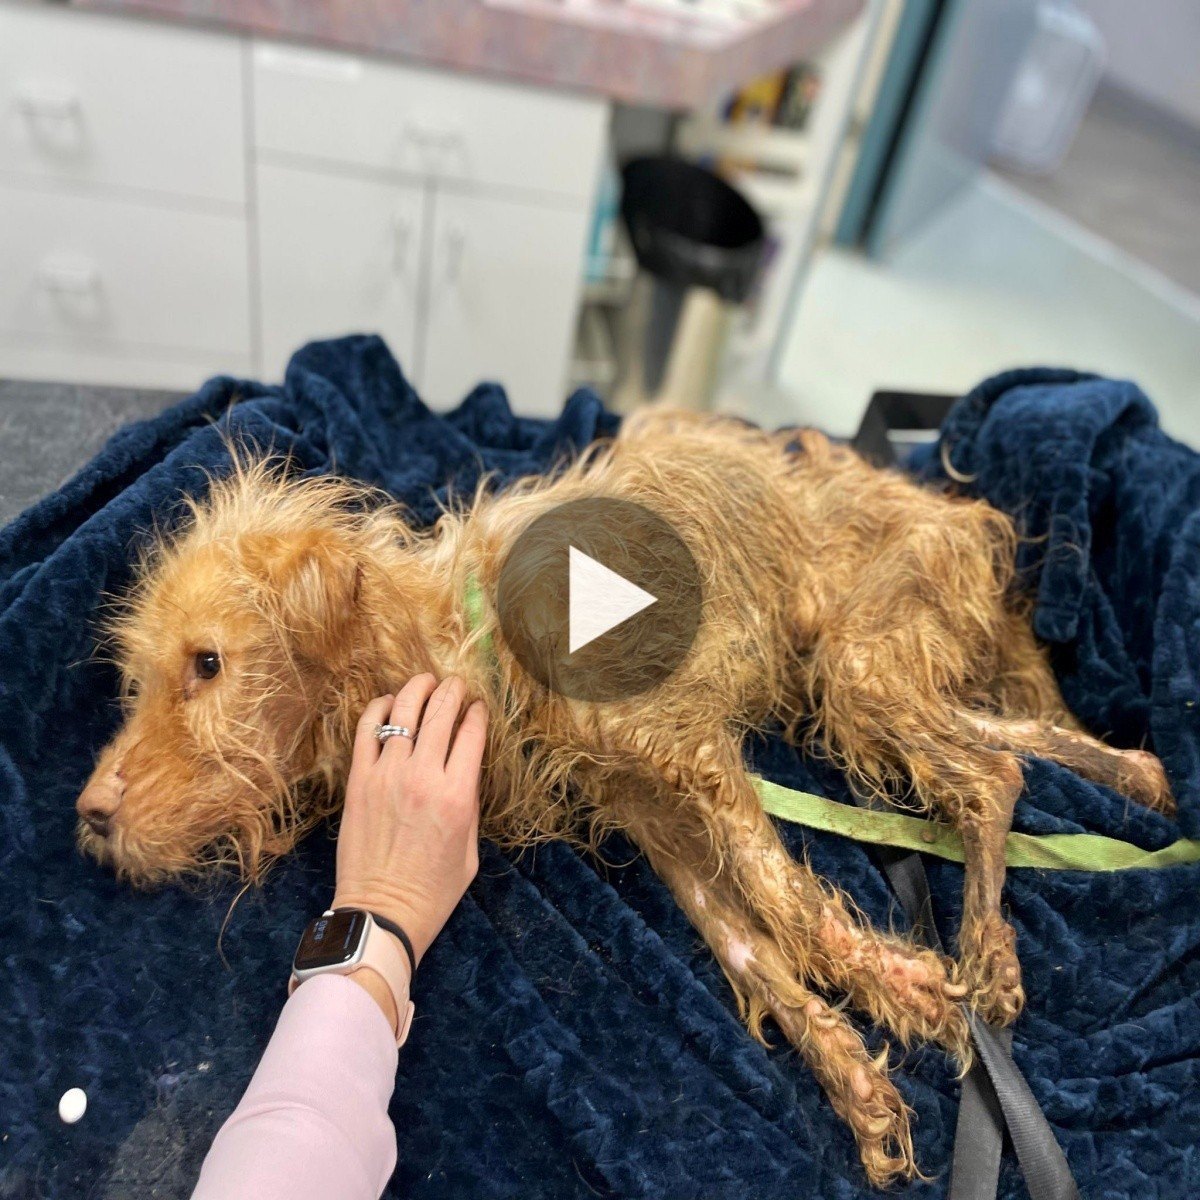 A dog who was sick from hunger and thirst for many days and had no life left was adopted and cared for by a nurse until he completely recovered.